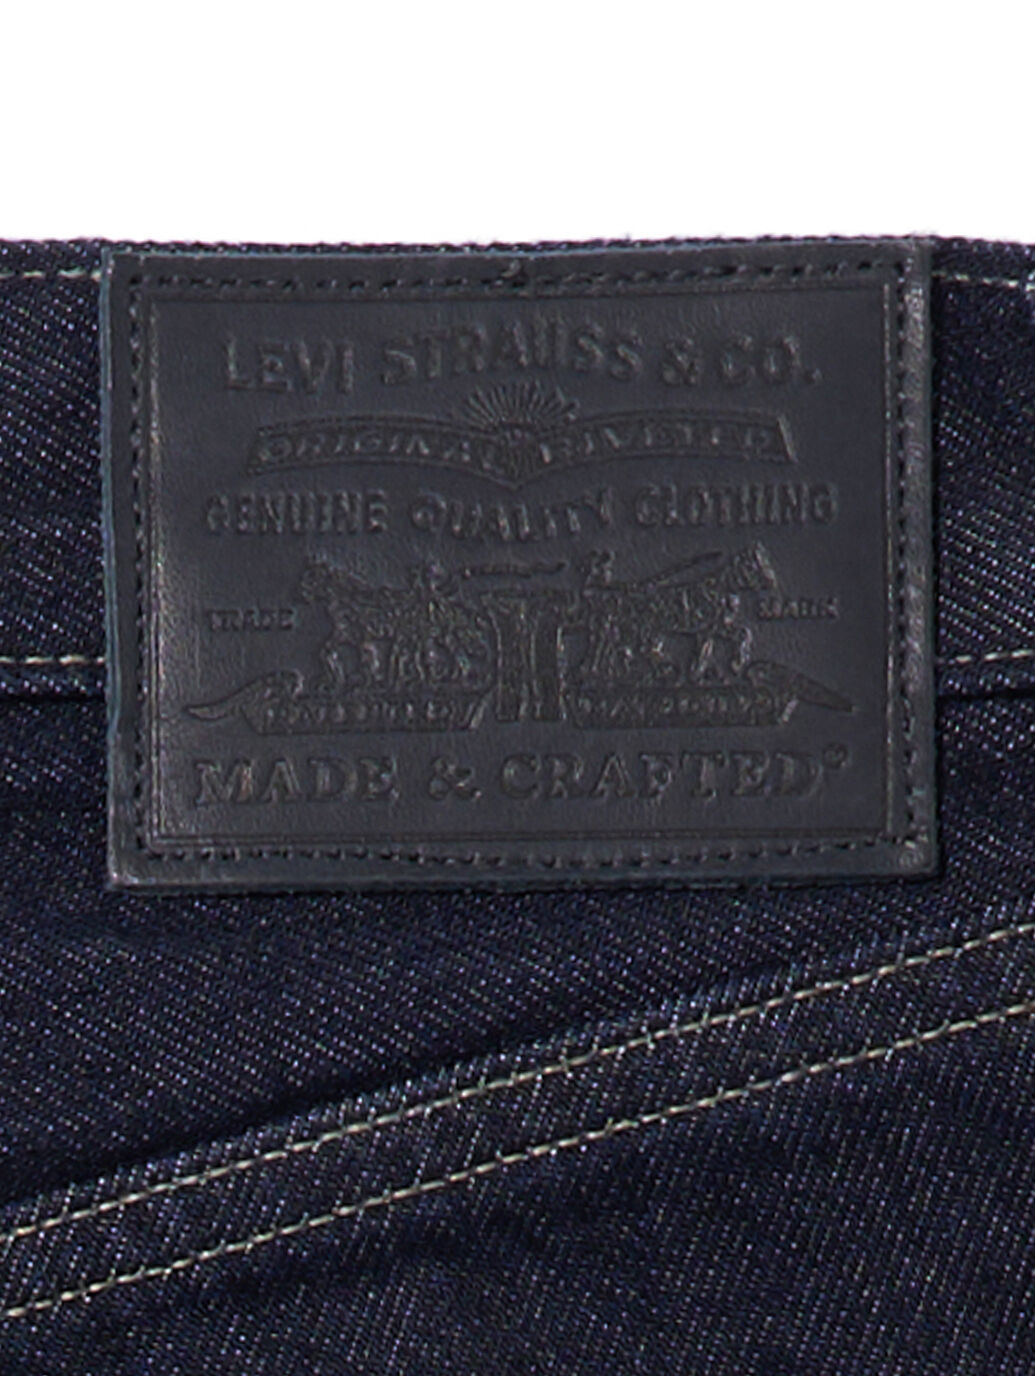 LEVI'S® MADE&CRAFTED®ワイドバレルジーンズ｜リーバイス® 公式通販